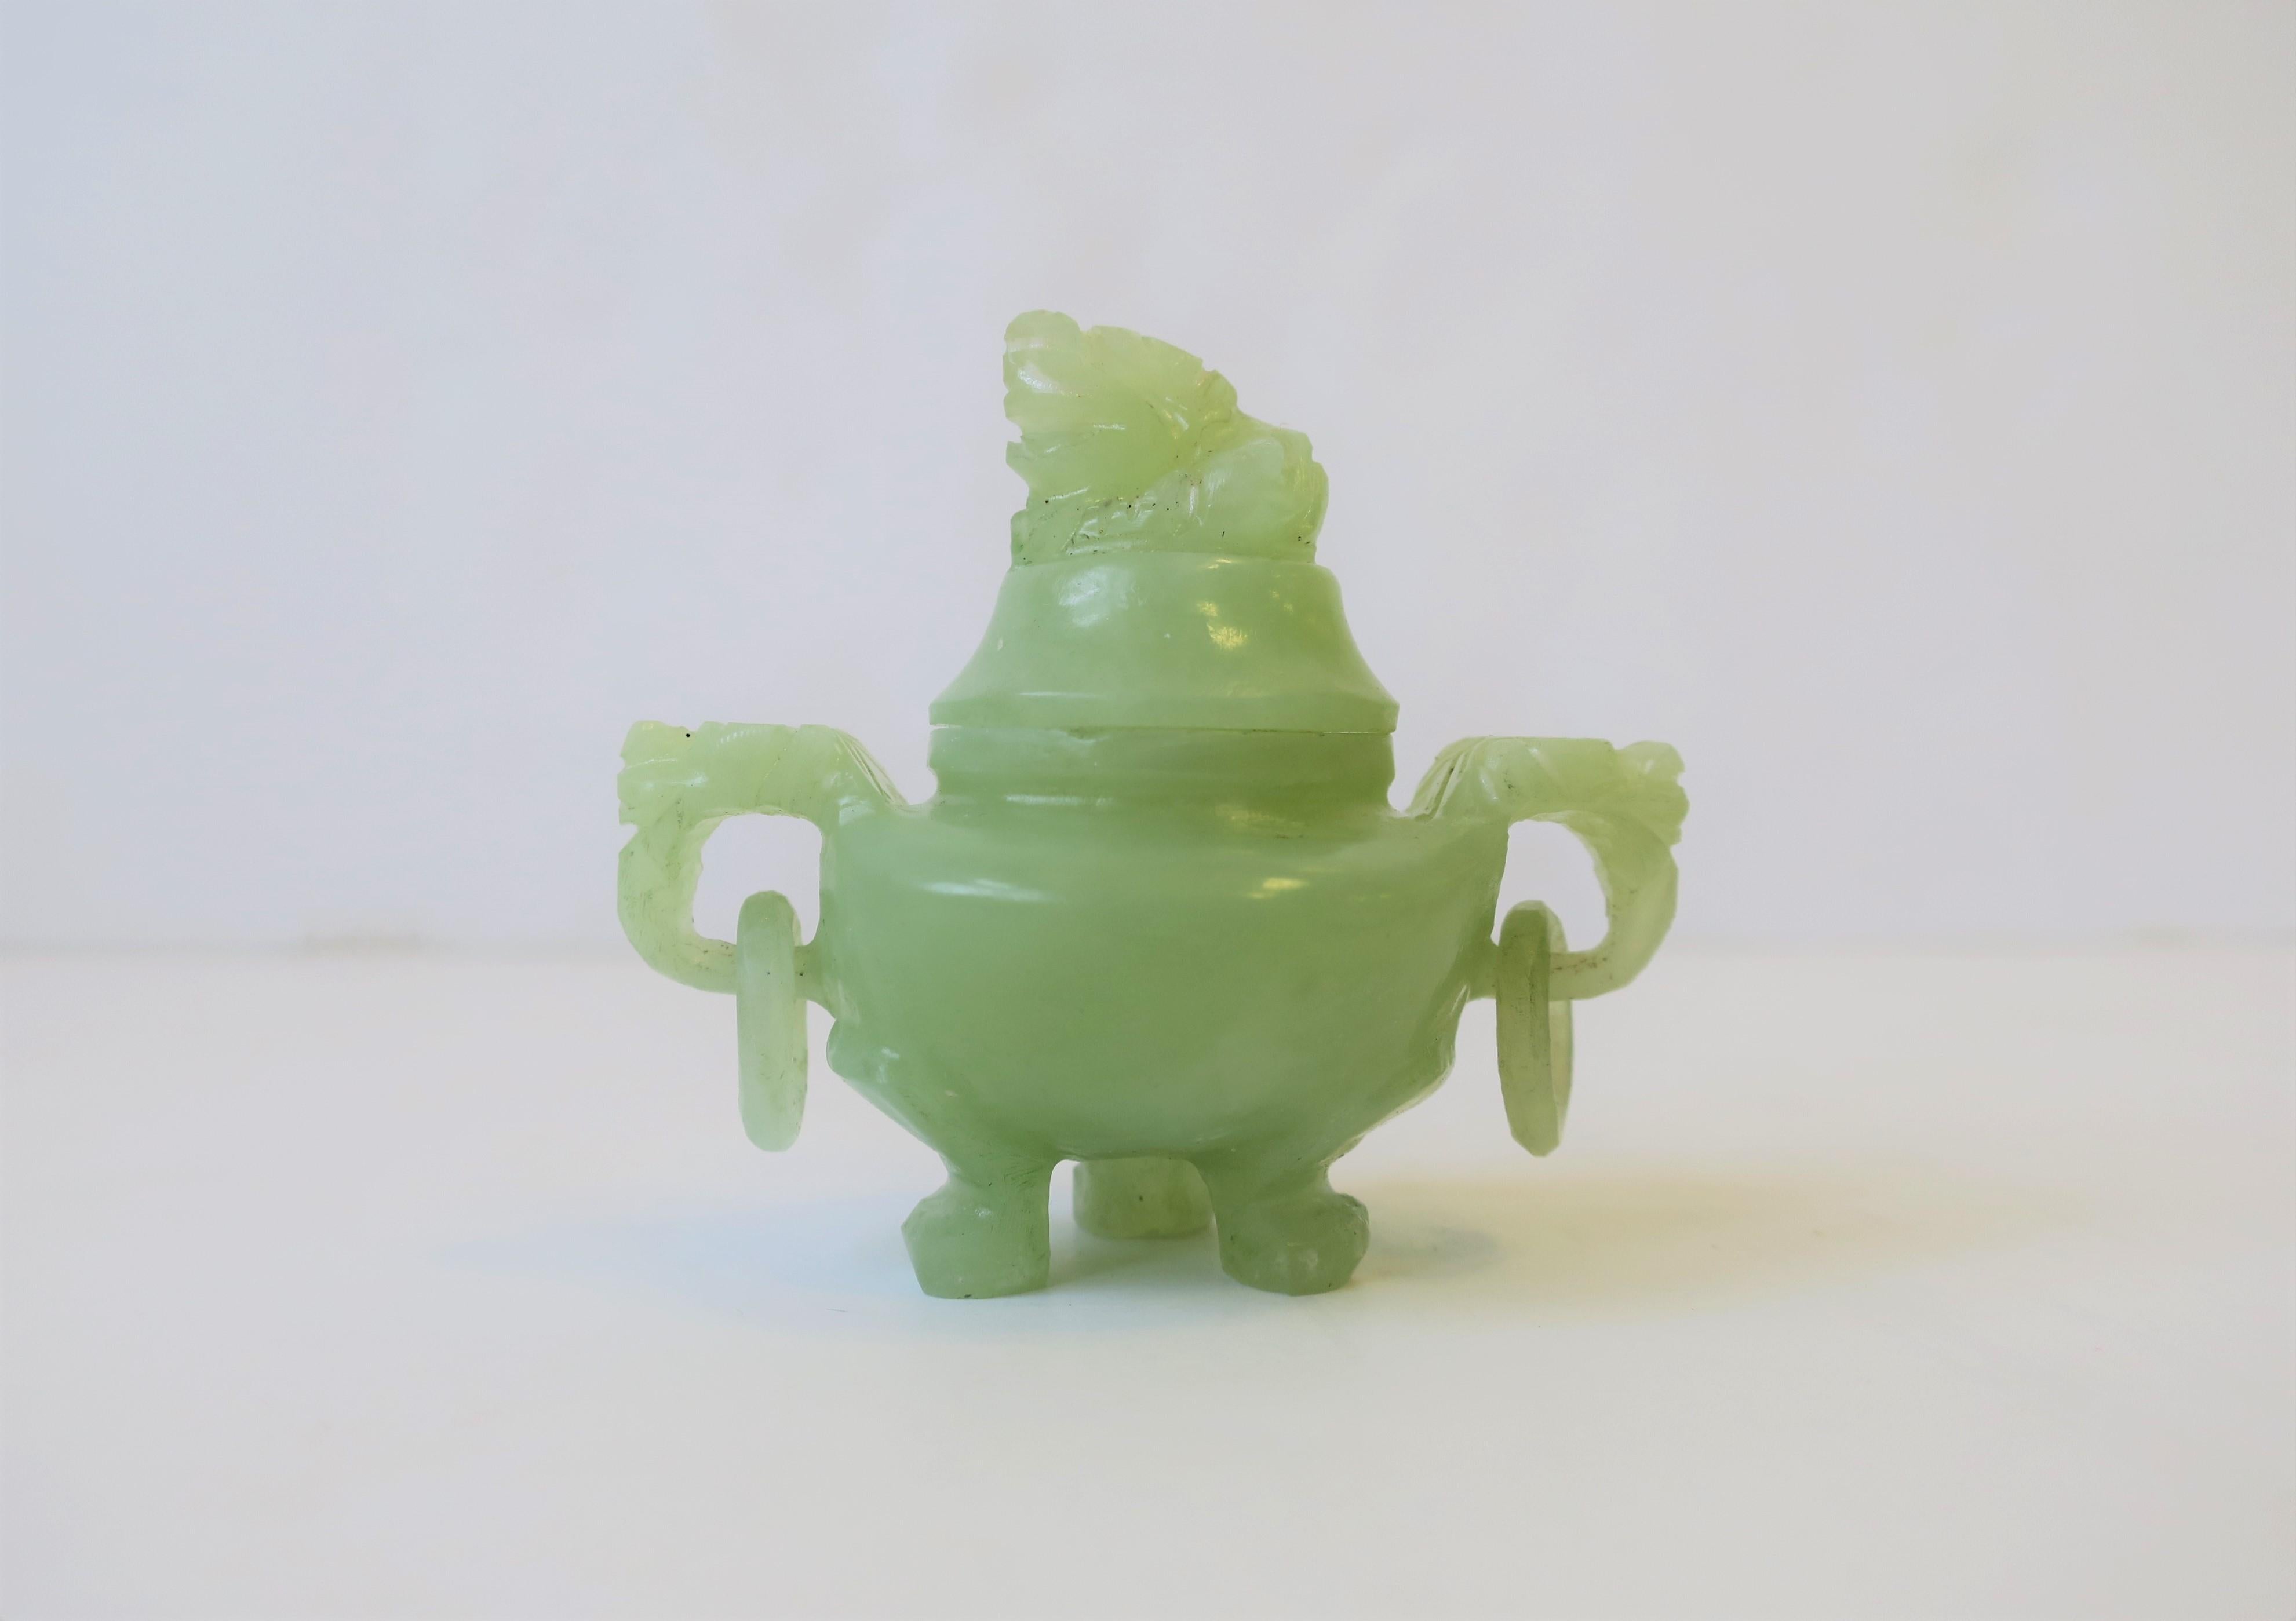 A small light green hue hard stone Chinese incense burner, circa 20th century, China. Incense burner has animal foo dog or lion hand carved design, loop handles, three foot/paw base and lid. Size perspective shown in image #3 next to car